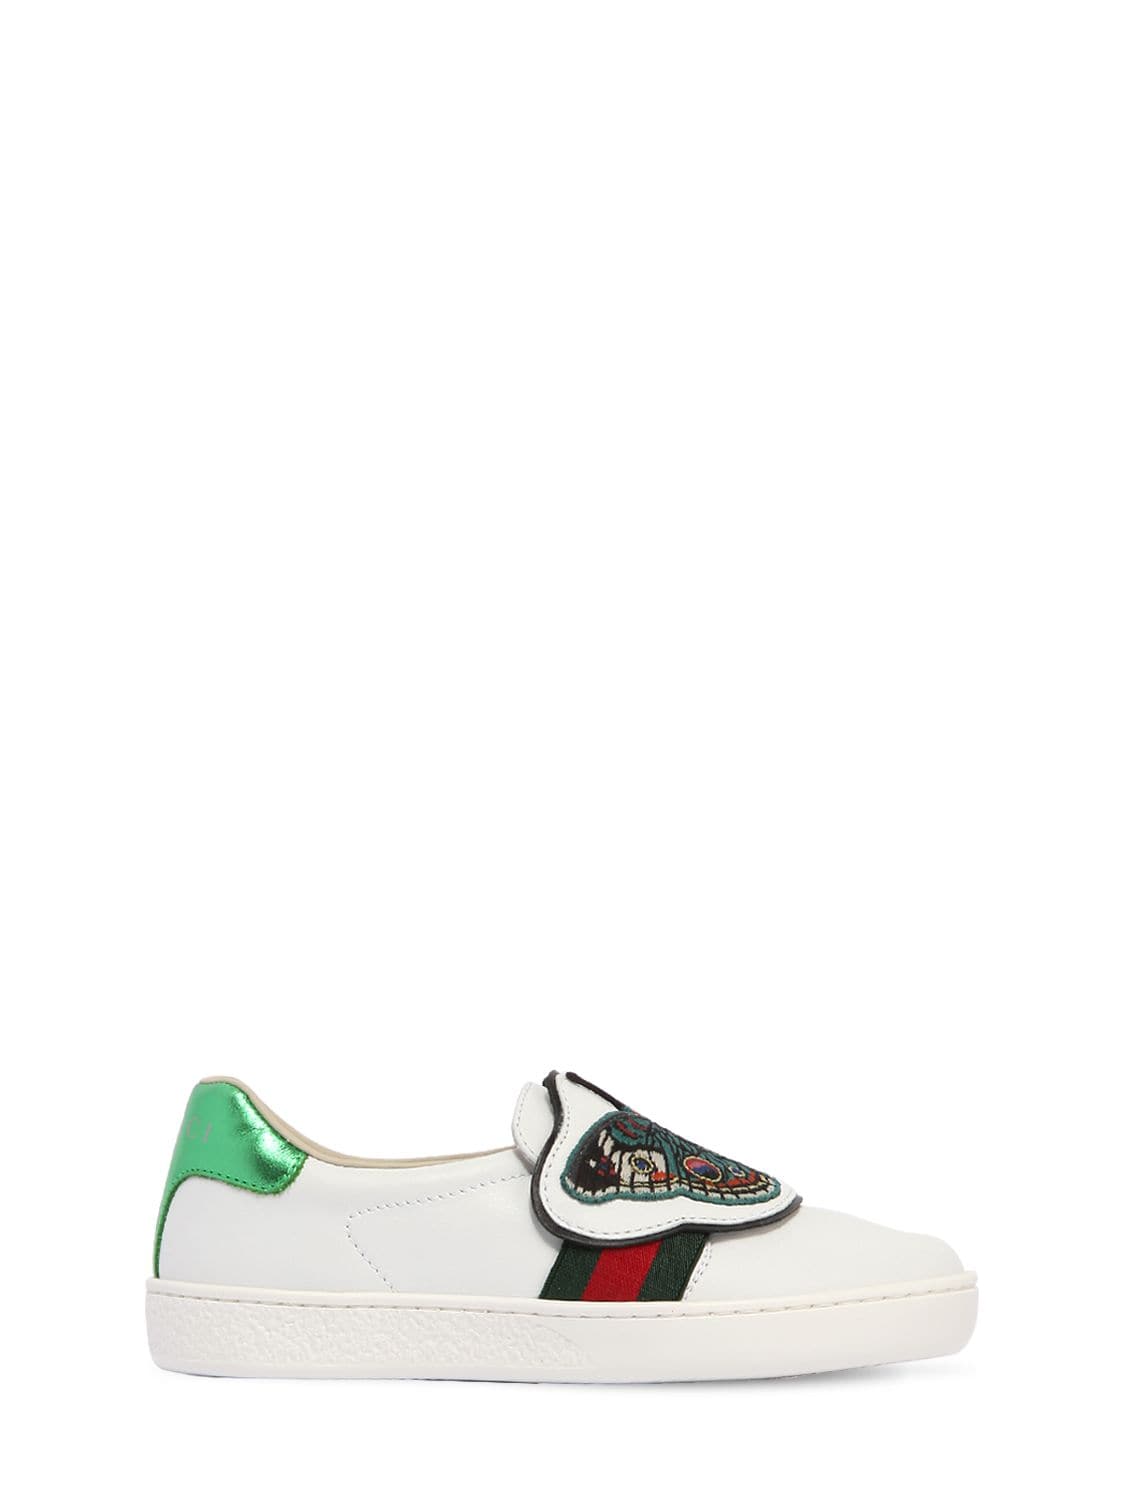 Gucci Kids' Butterfly Leather Slip-on Trainers In White